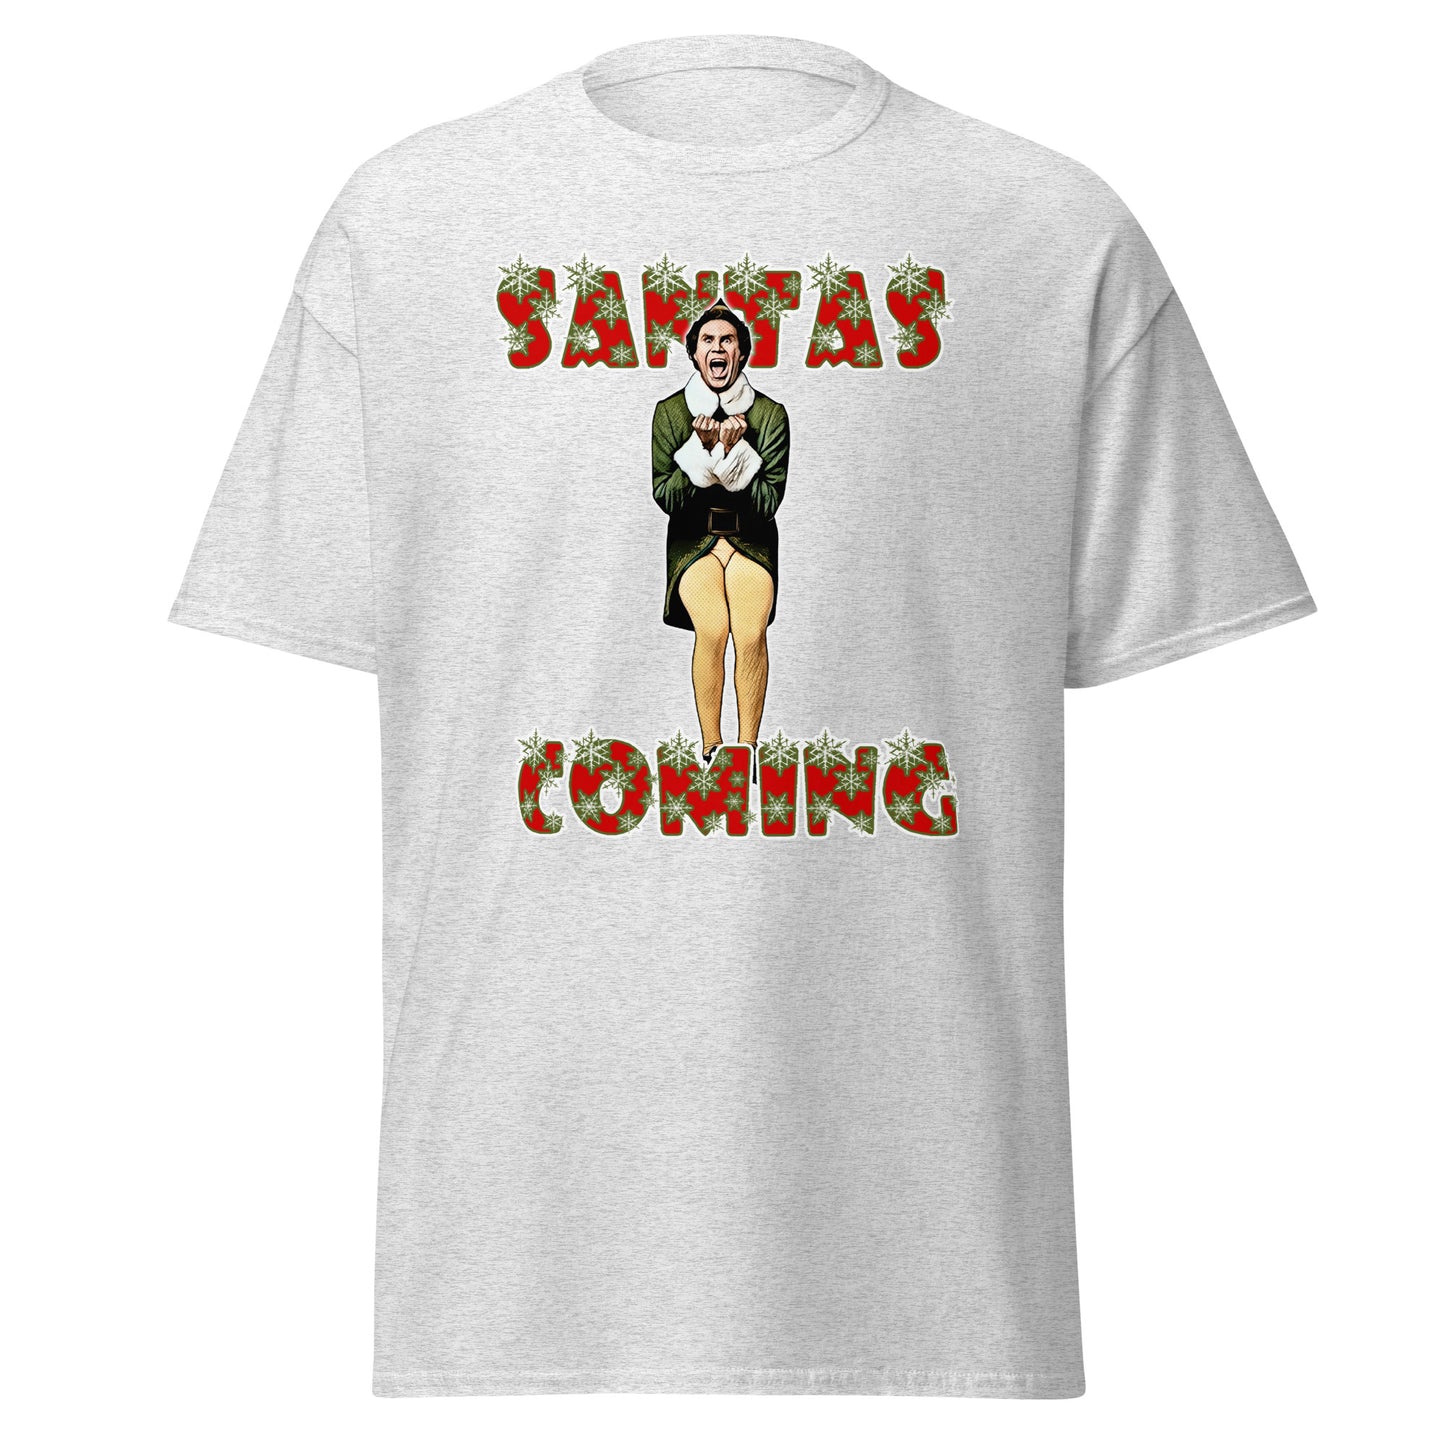 Buddy the Elf - Santa's Coming T-Shirt - Spreading Holiday Excitement